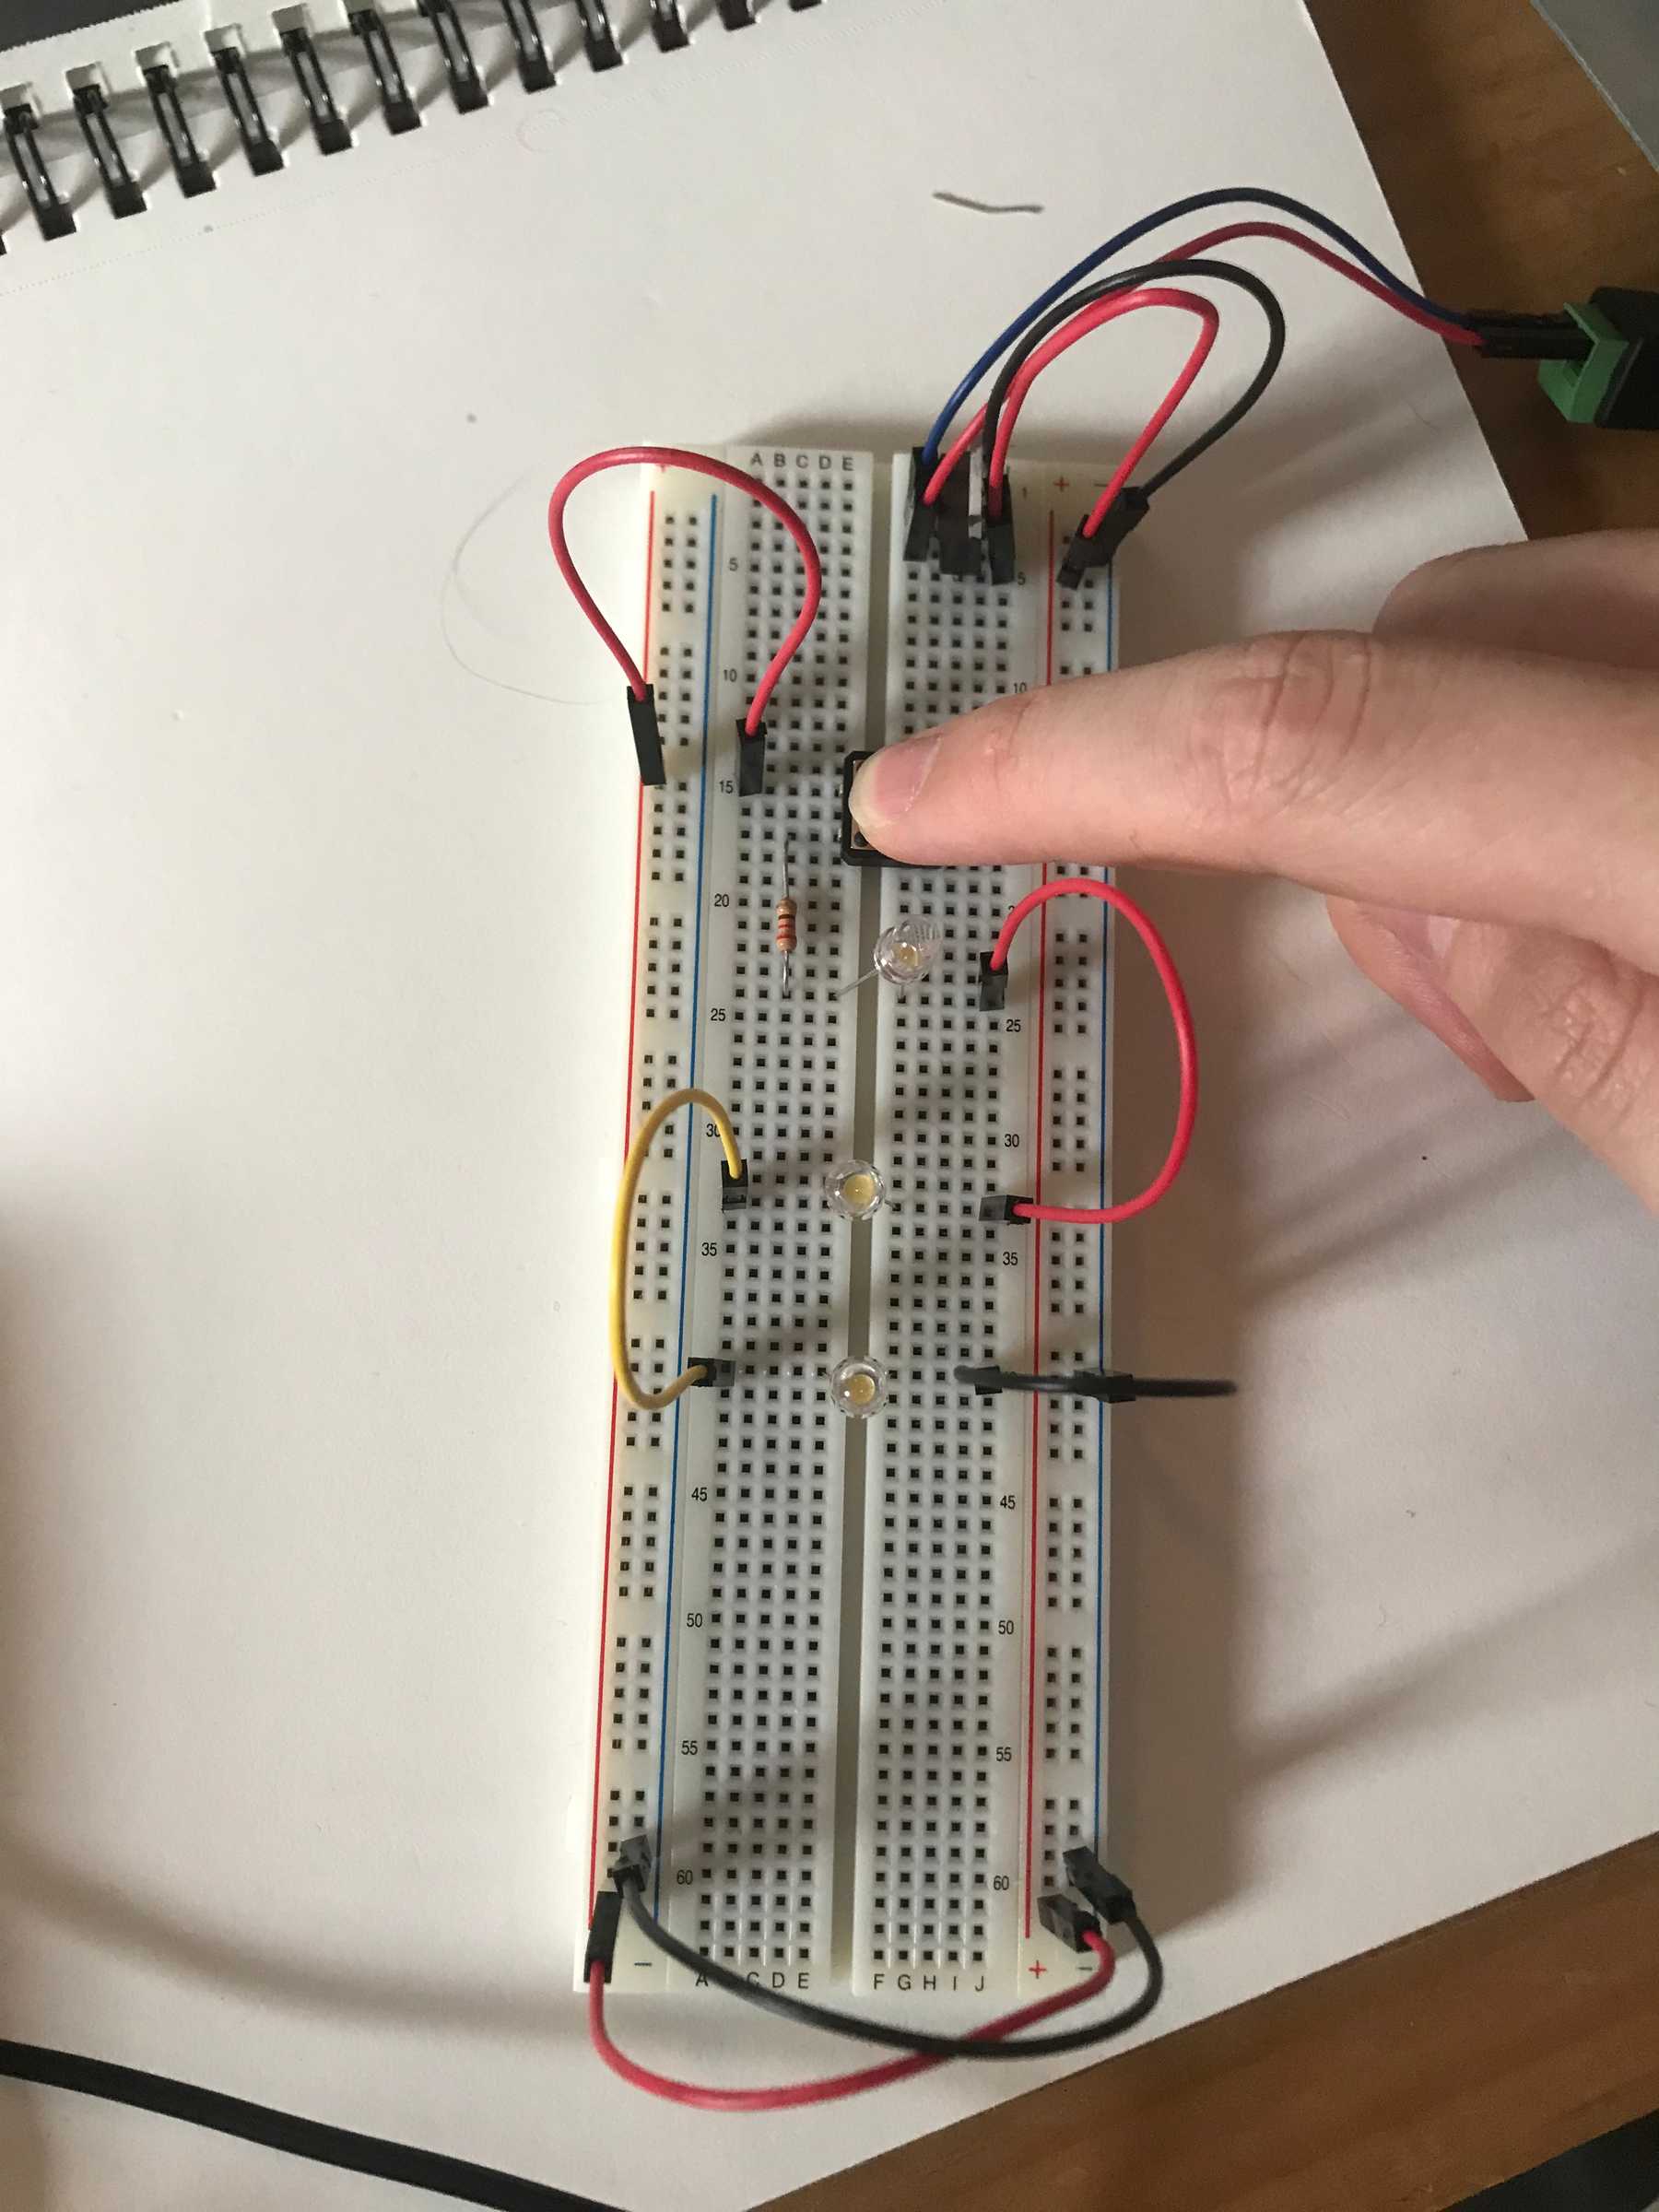 Pressing the button does not turn on the LEDs